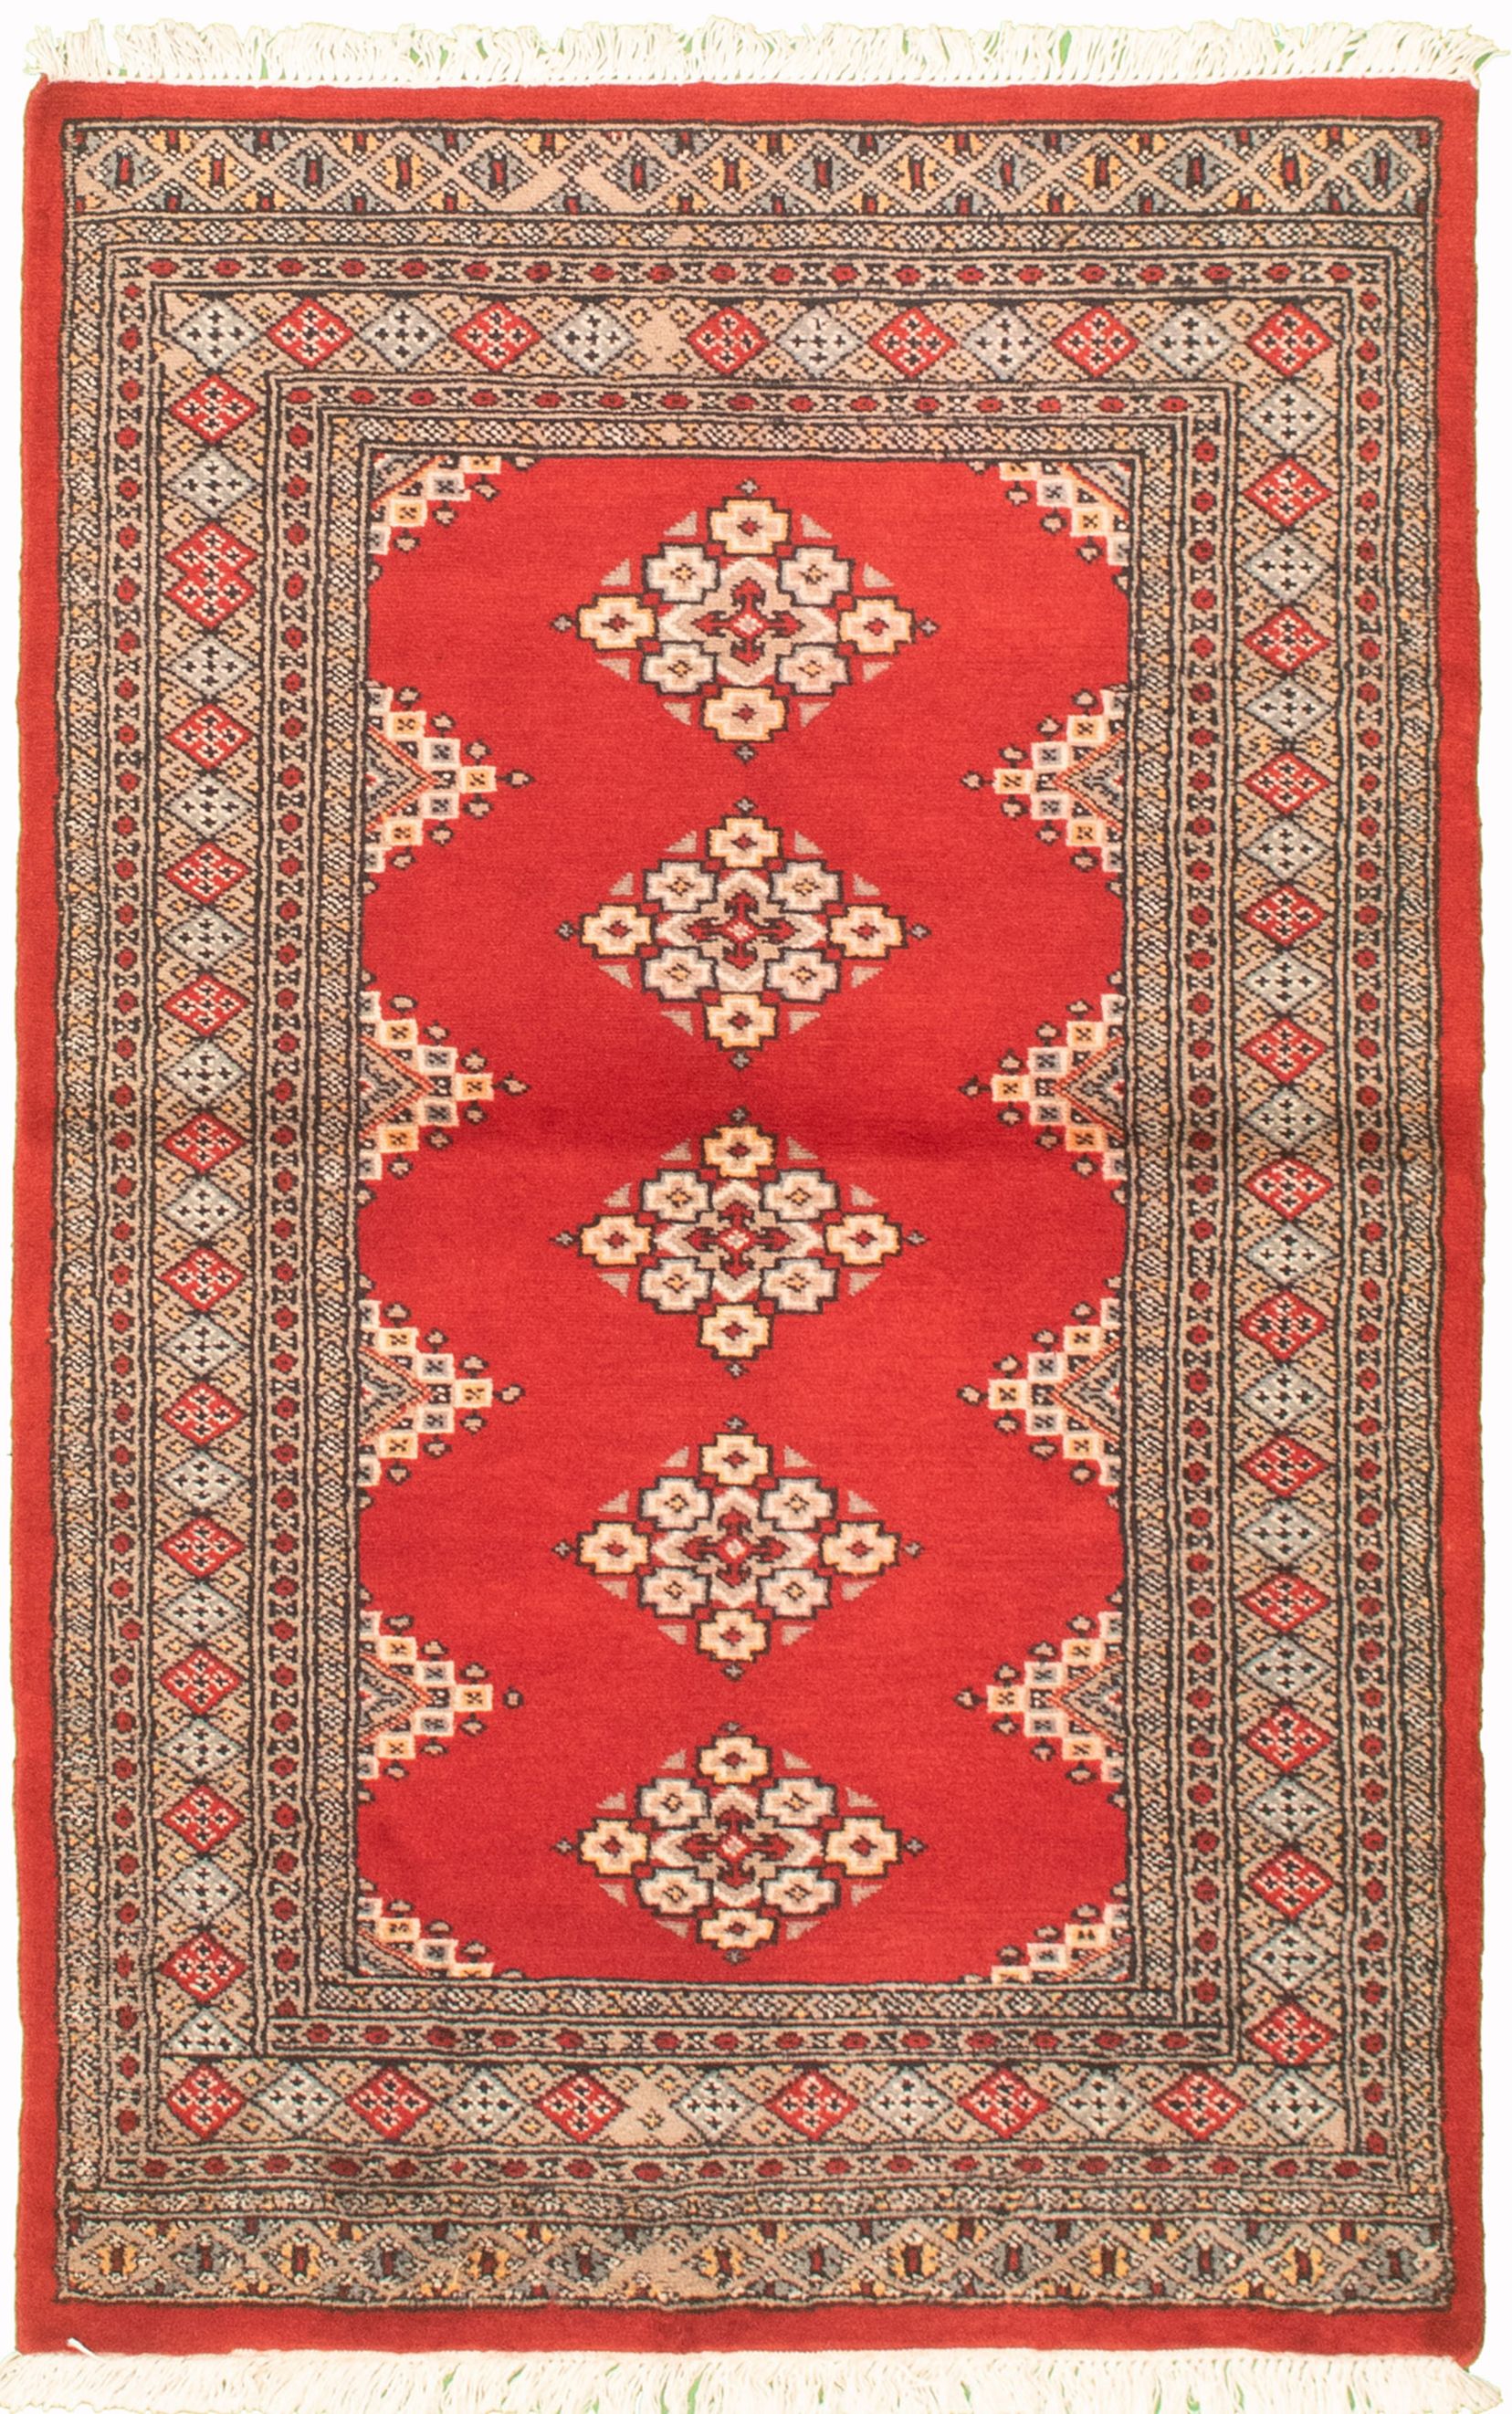 Hand-knotted Finest Peshawar Bokhara Red Wool Rug 3'1" x 5'1"  Size: 3'1" x 5'1"  